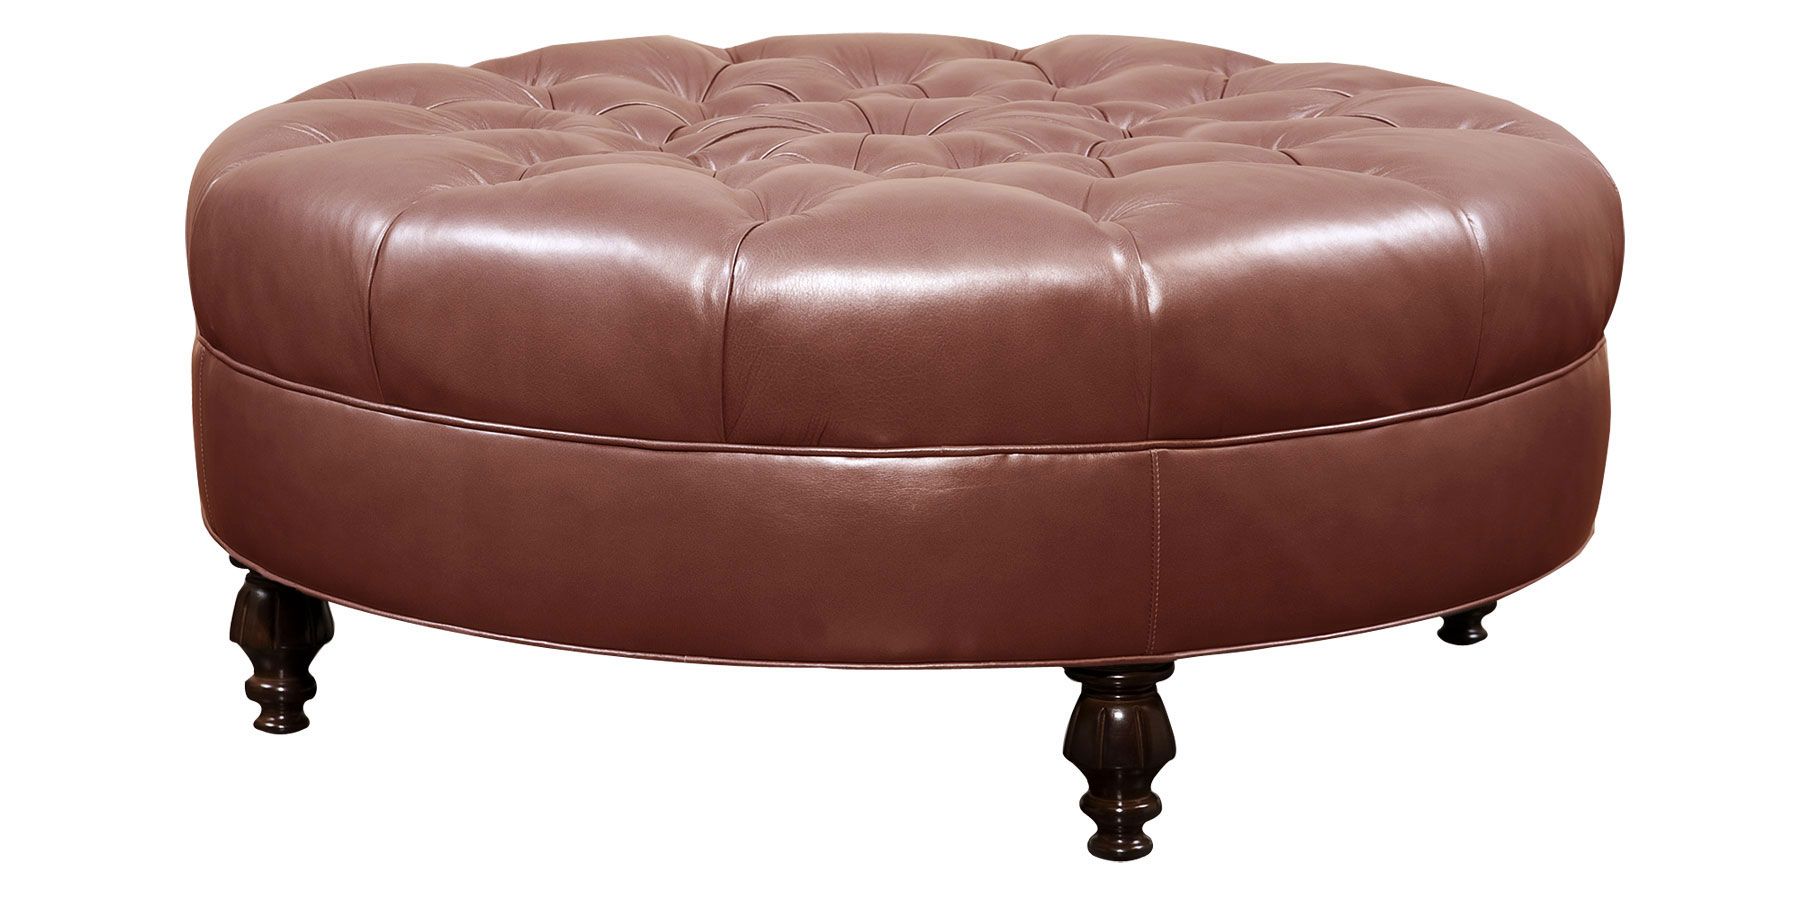 Leather Ottomans And Coffee Table Storage Round Leather Storage Ottoman Coffee Table Leather Large Round Tufted Ottoman (View 5 of 10)